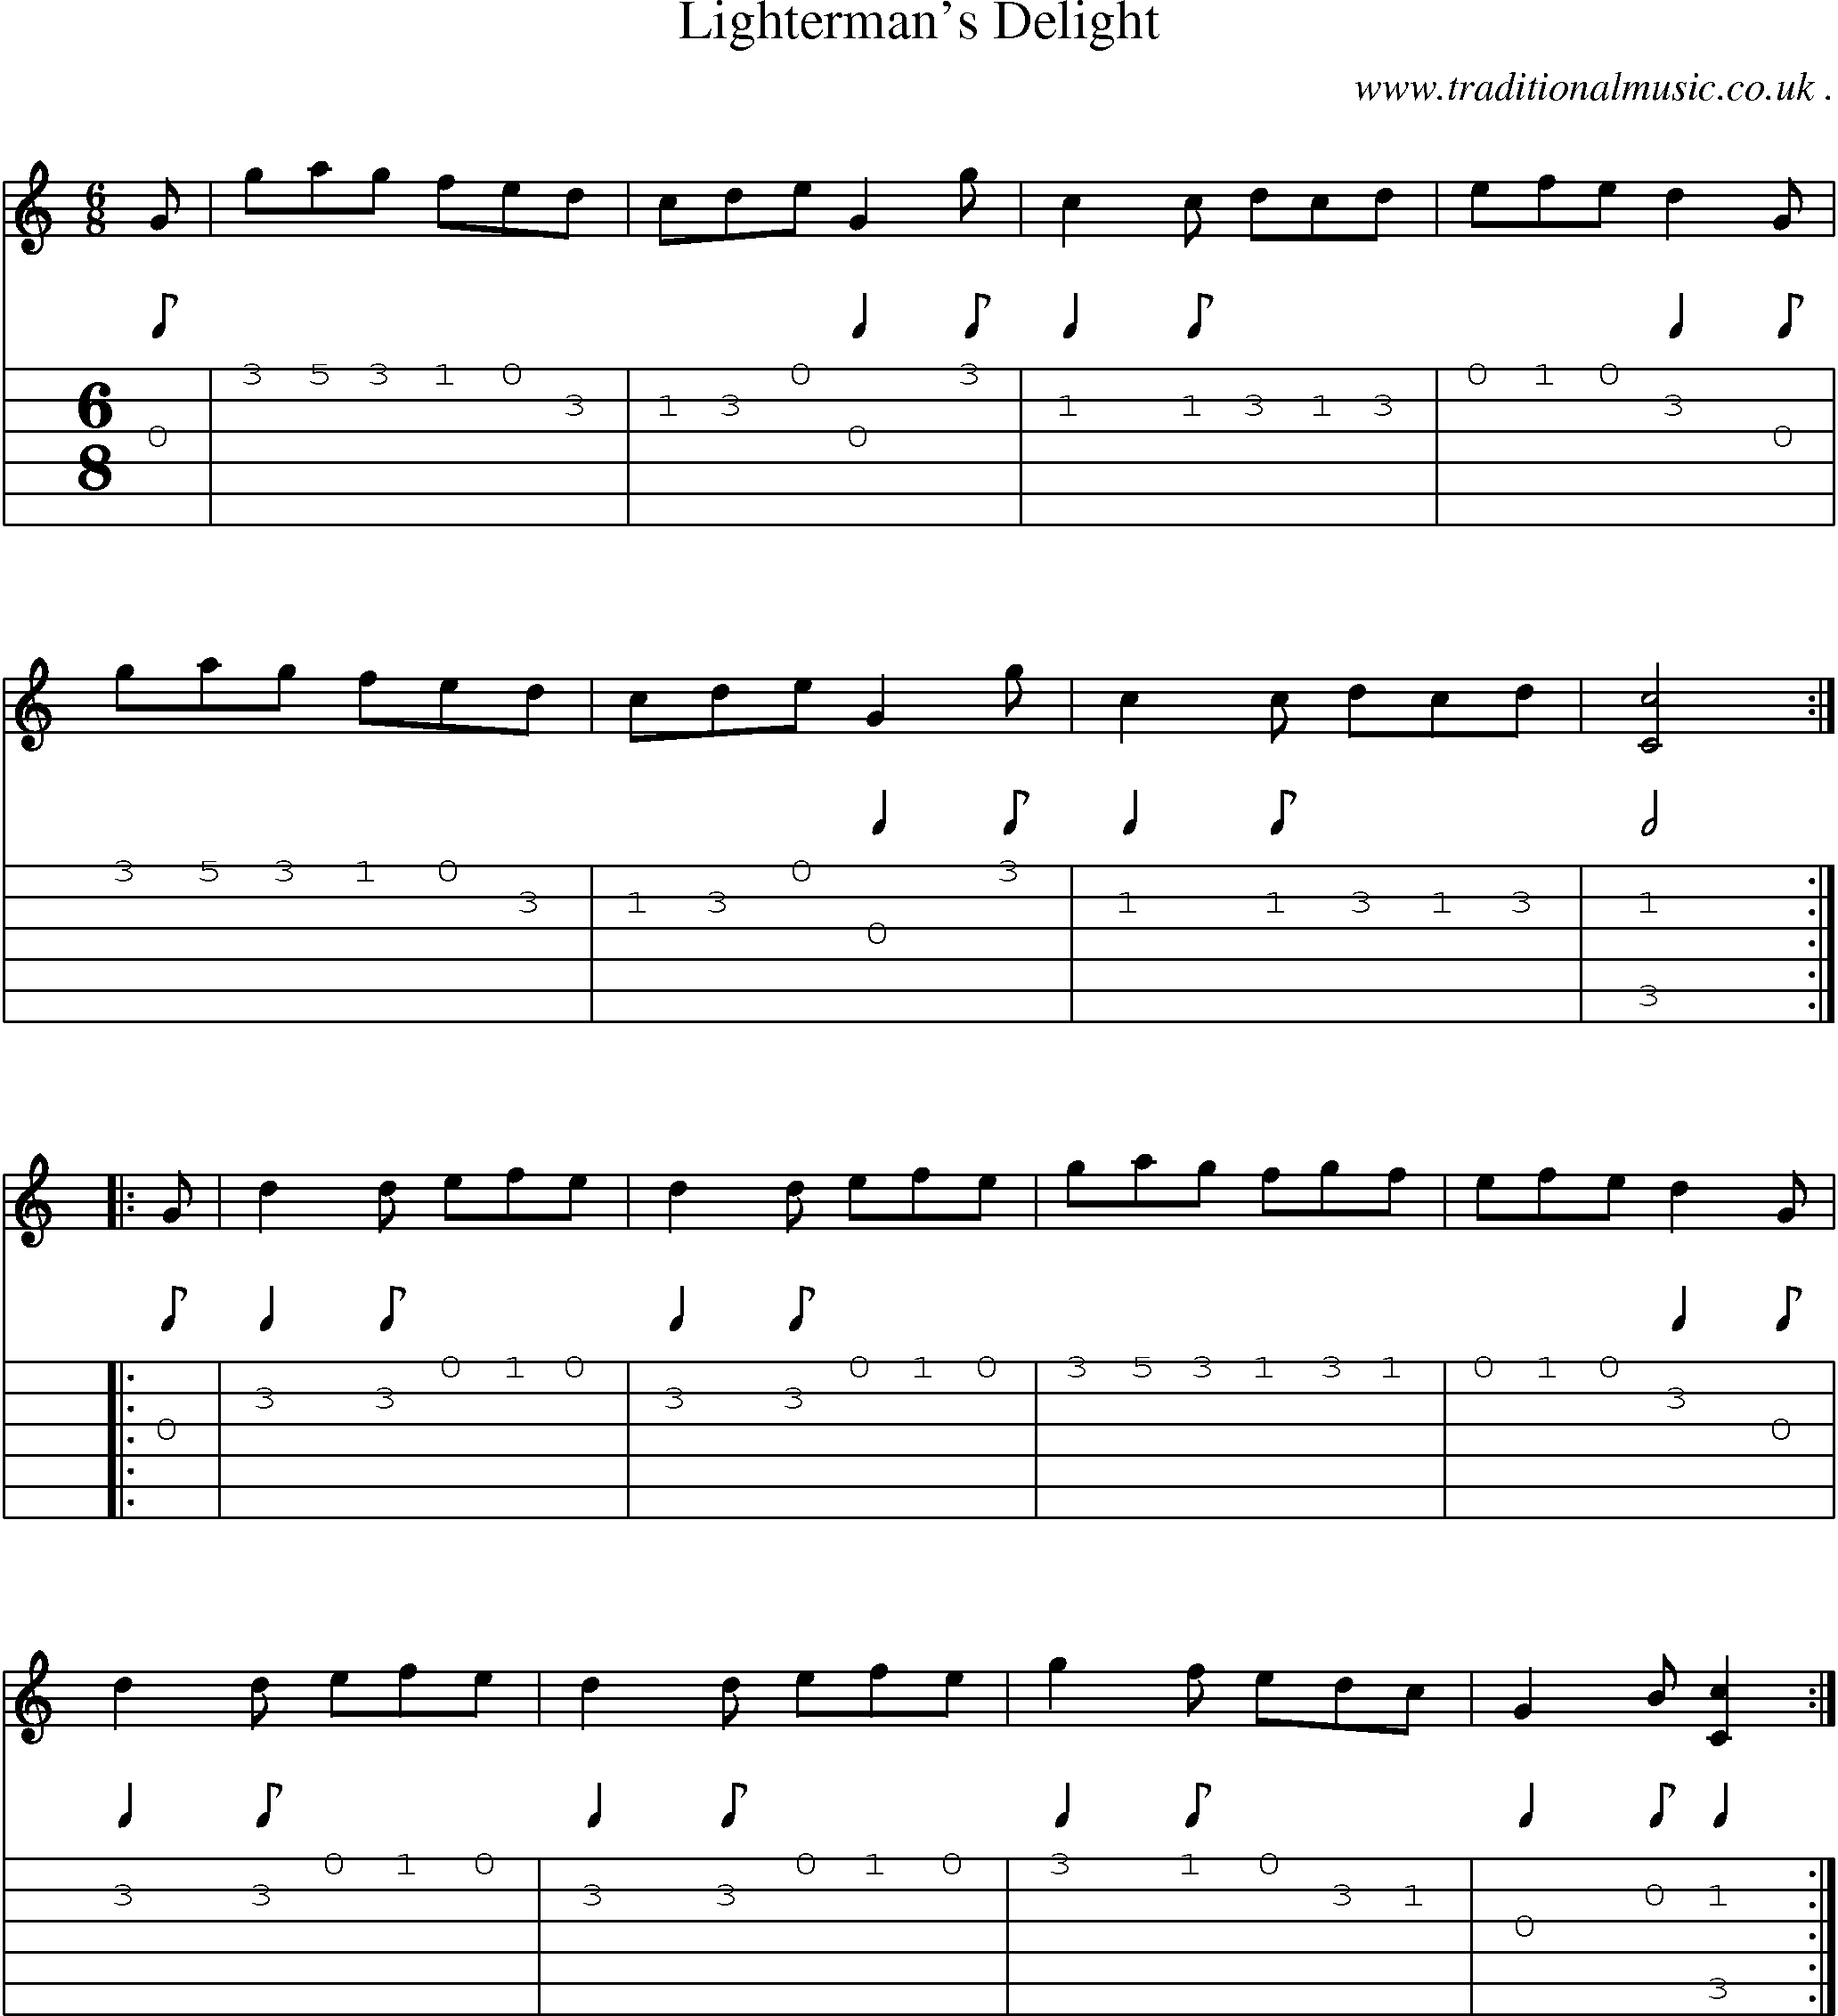 Sheet-Music and Guitar Tabs for Lightermans Delight